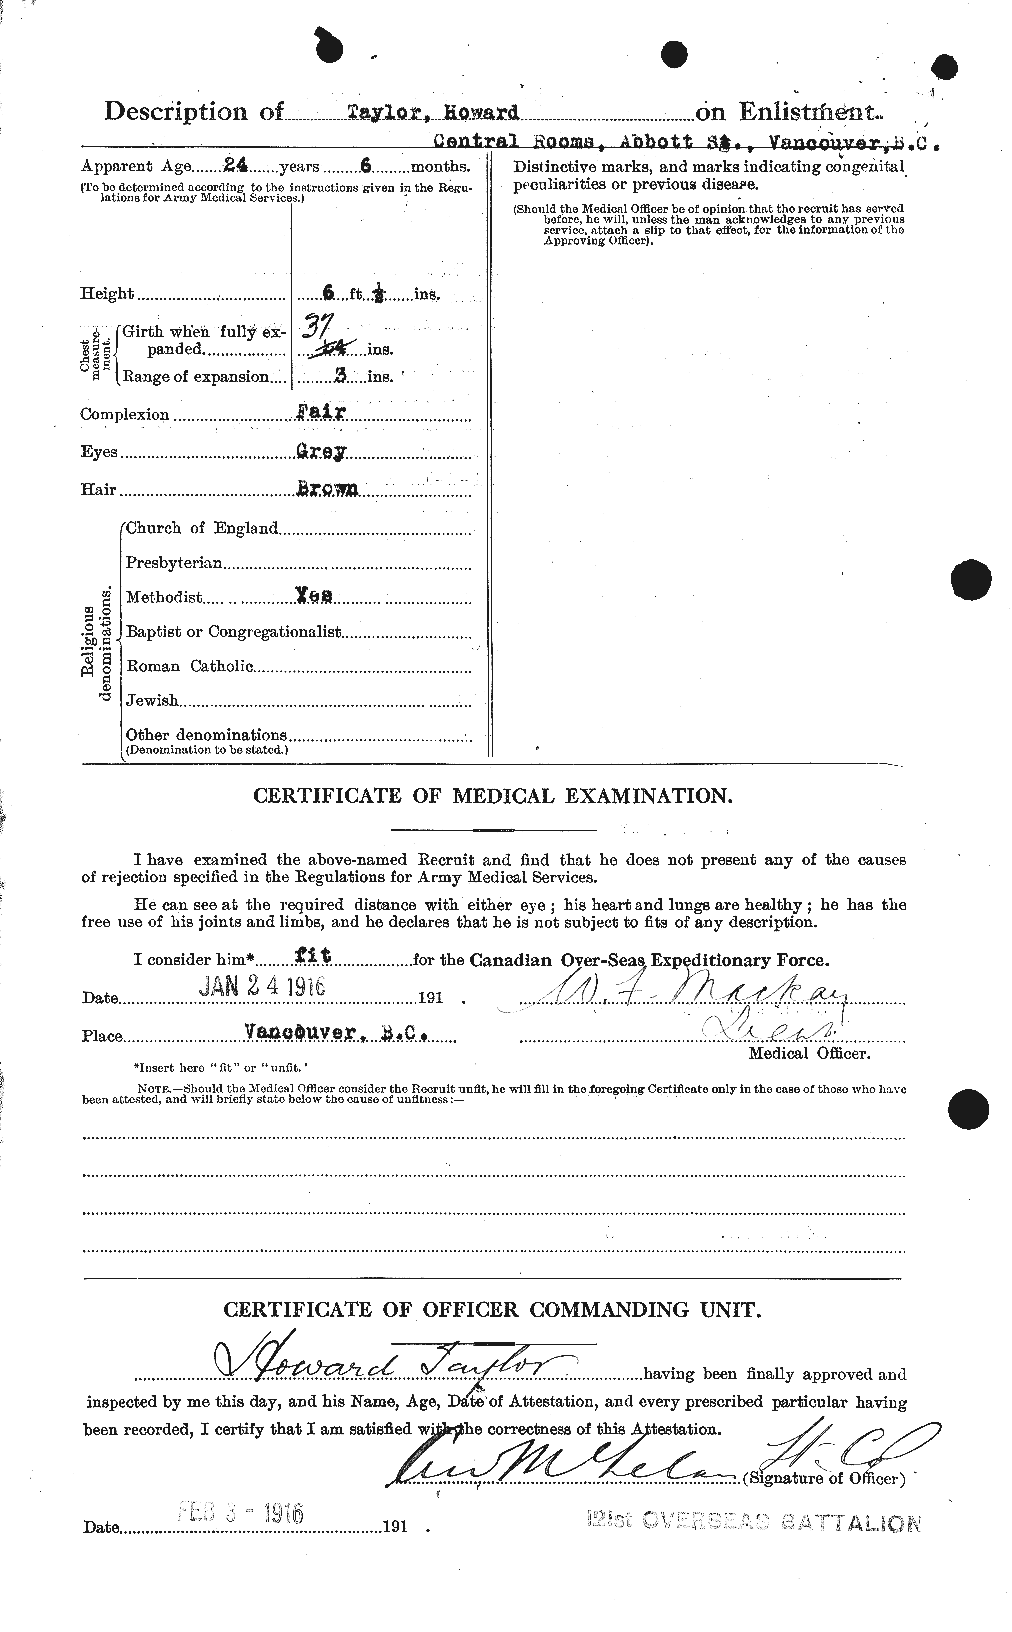 Personnel Records of the First World War - CEF 626597b